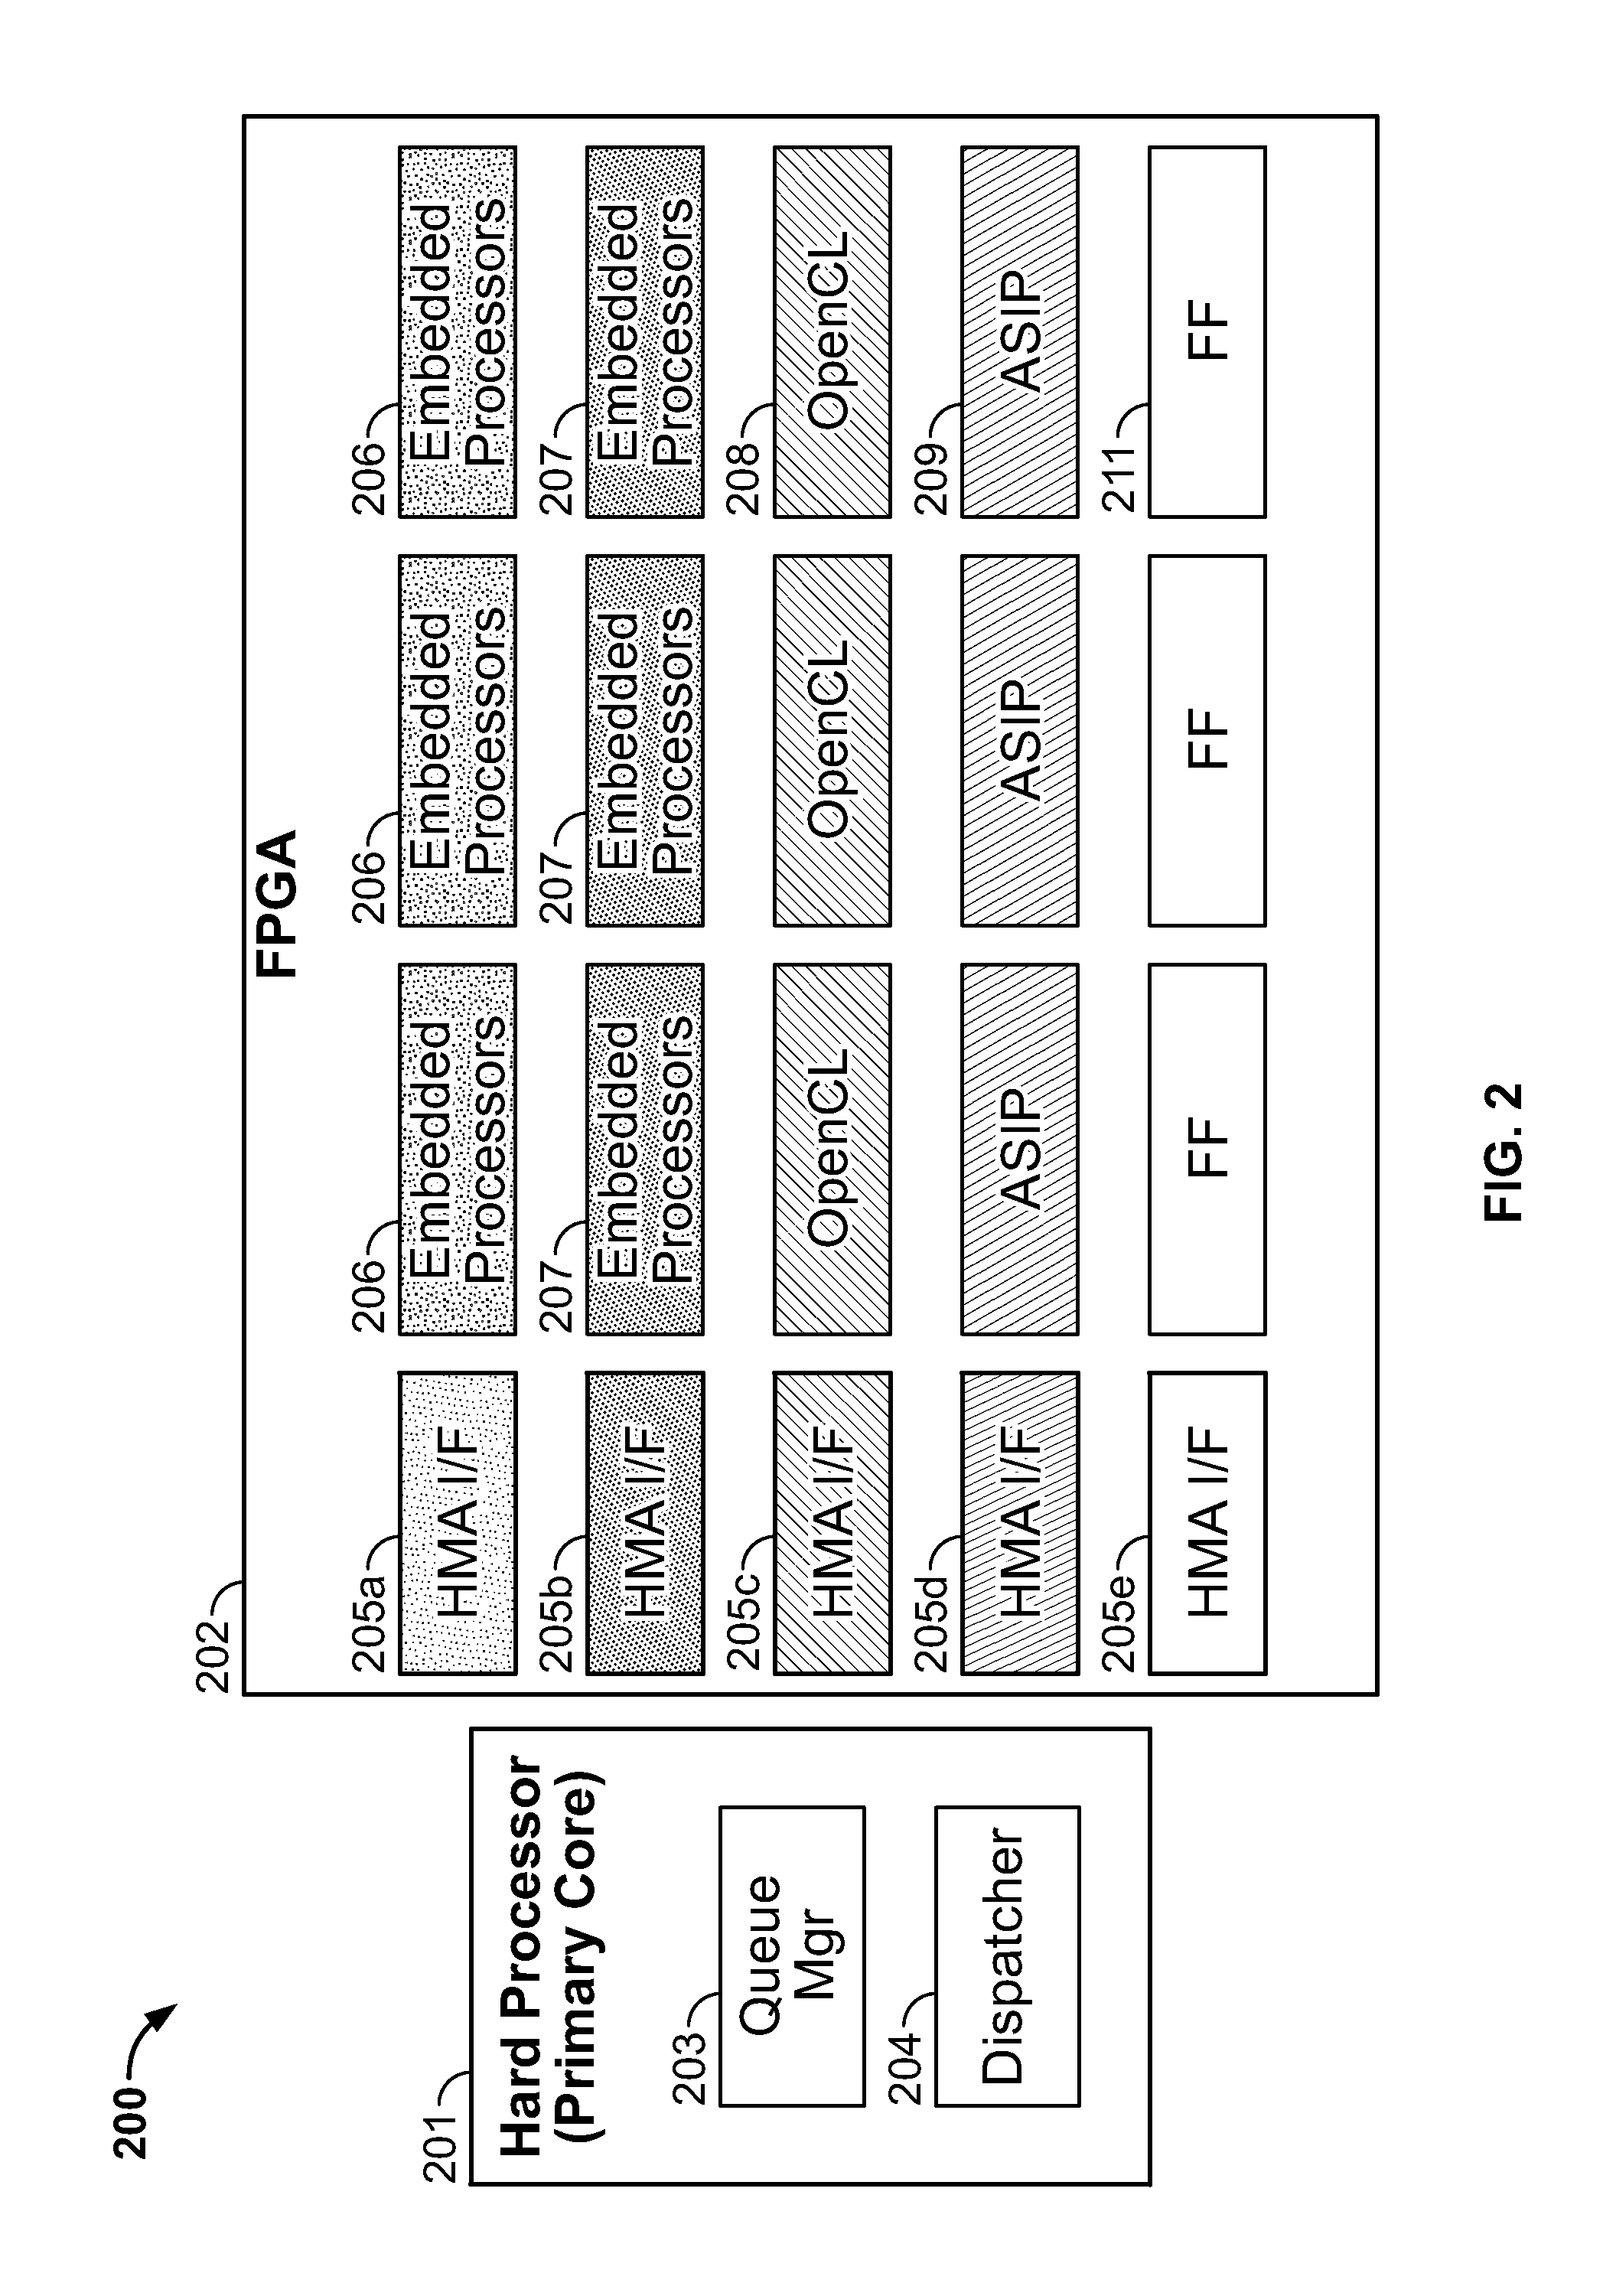 Application-based dynamic heterogeneous many-core systems and methods